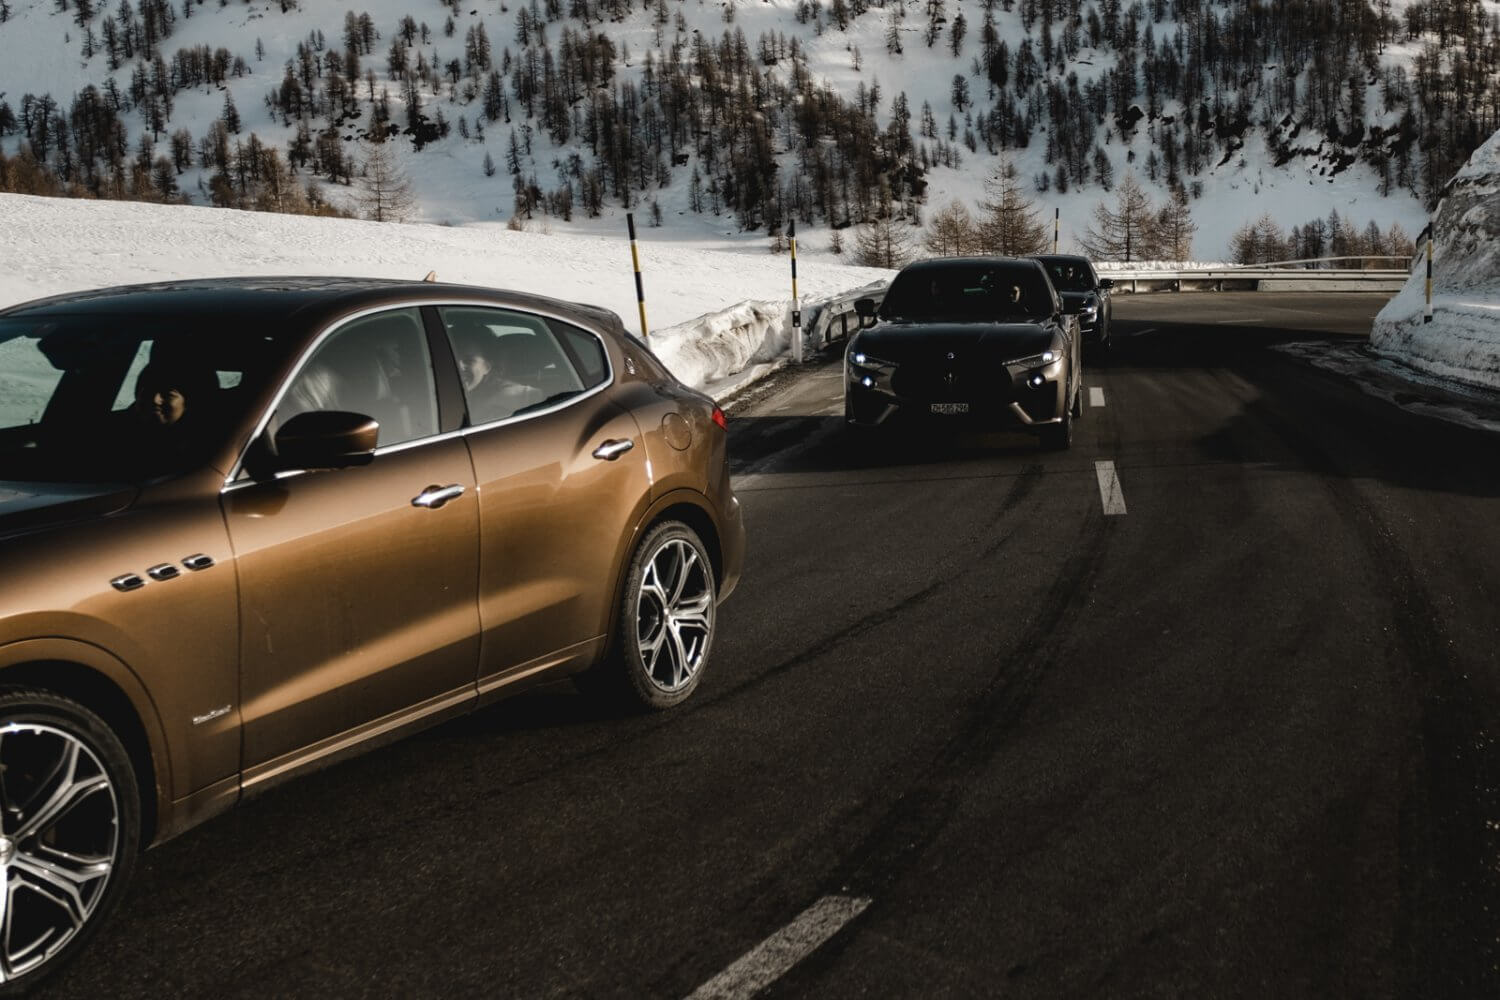 Maserati Royale Special Series Steals the Show at the Snow Polo World Cup 2020 St. Moritz